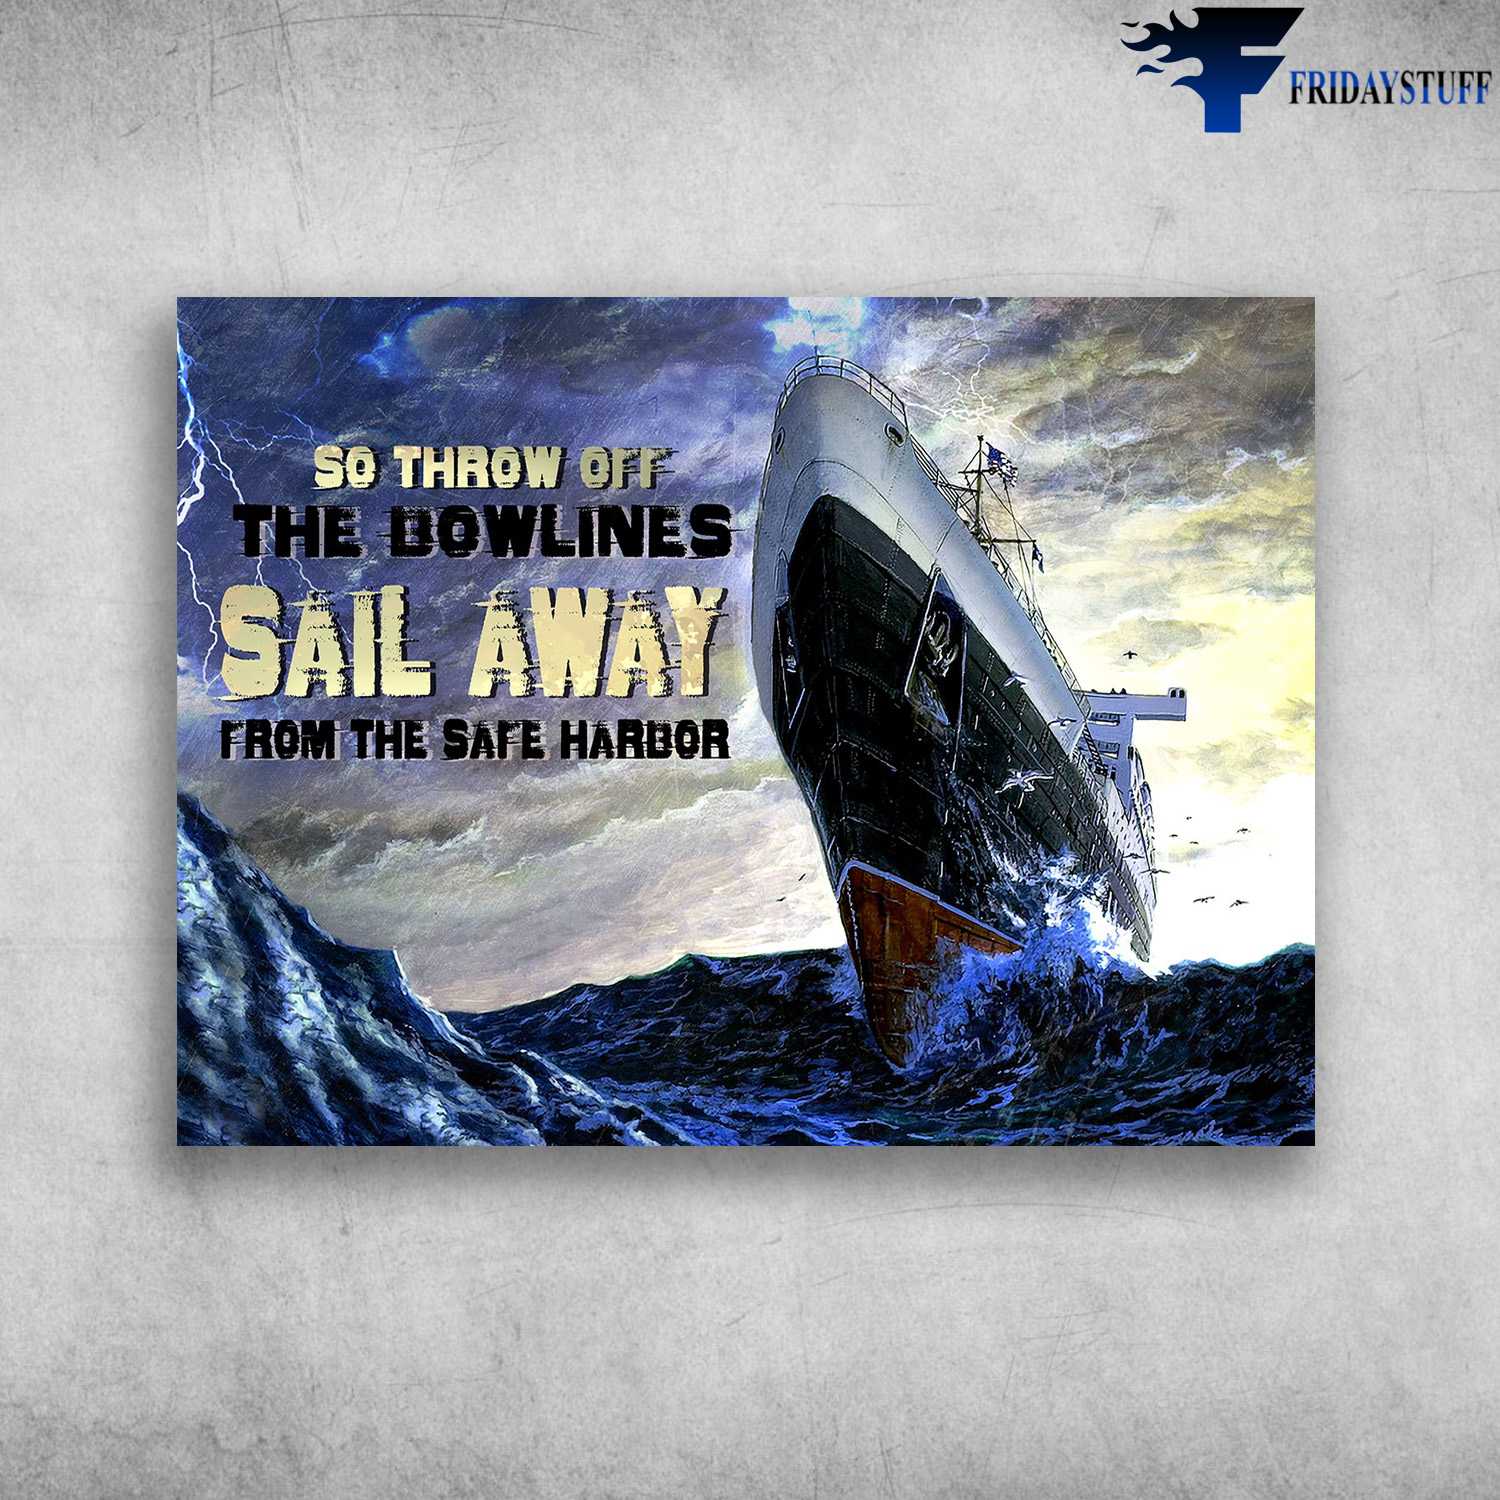 Ocean Poster - So Throw Off The Bowlines, Sail Away From The Safe Harbor